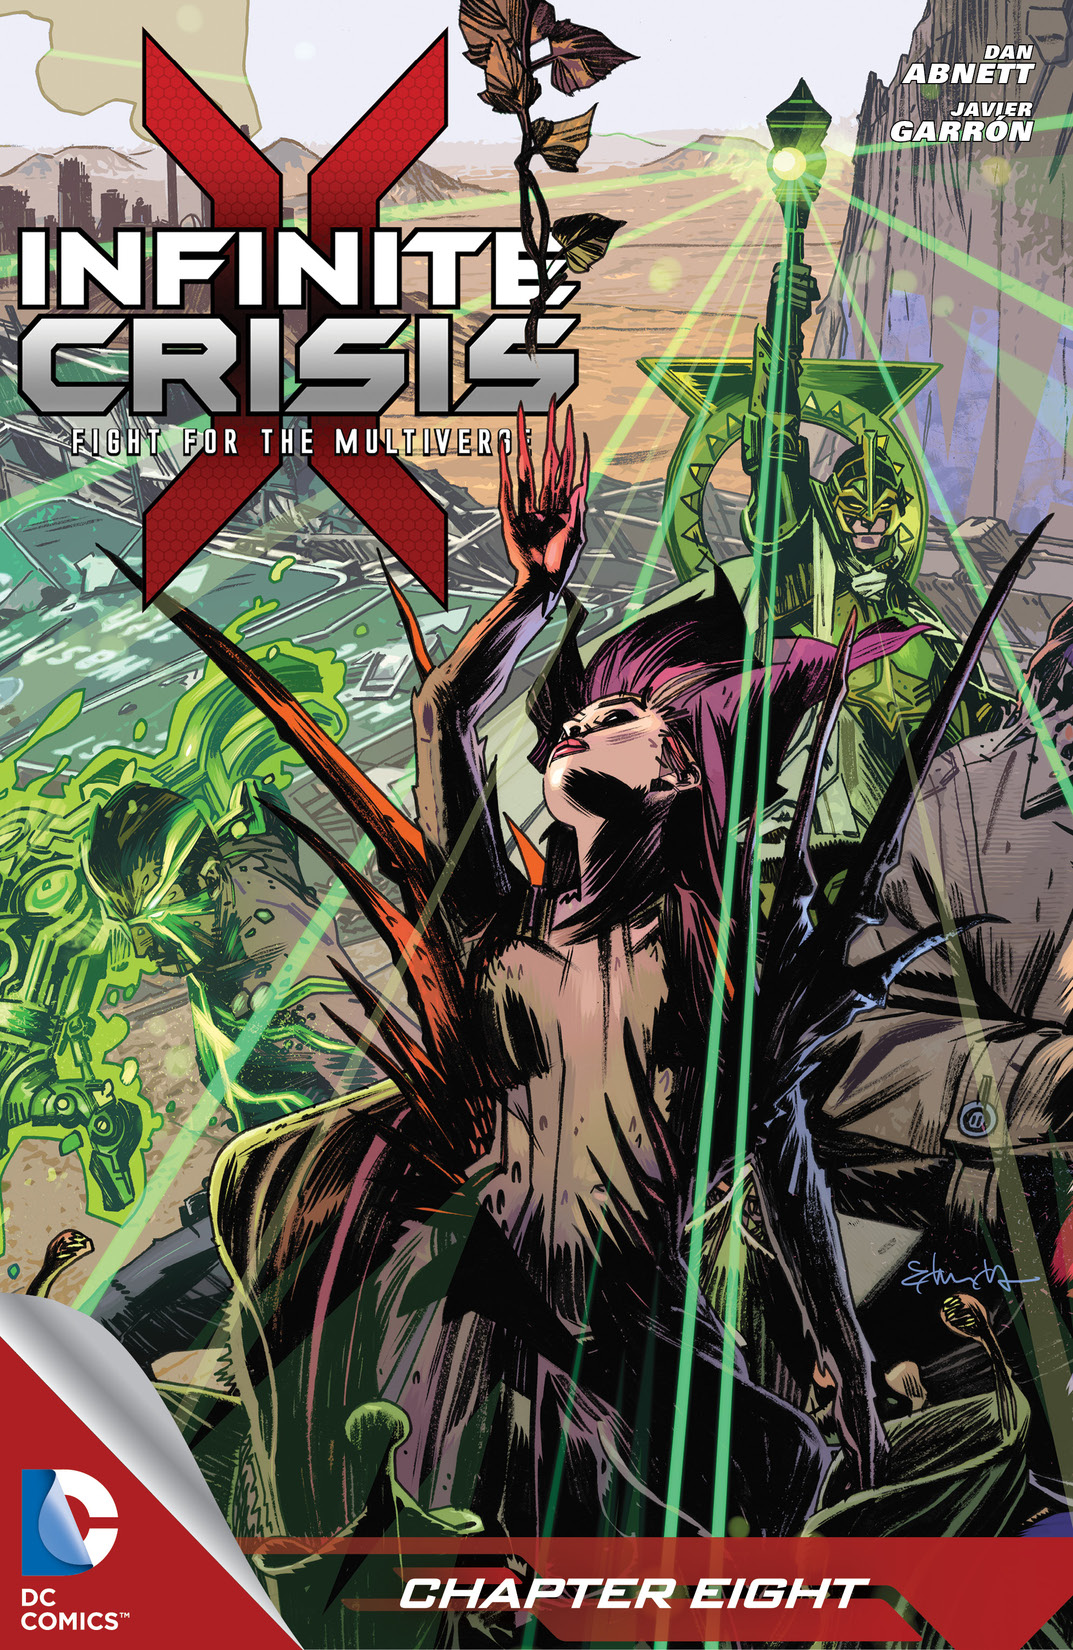 Infinite Crisis: Fight for the Multiverse #8 preview images